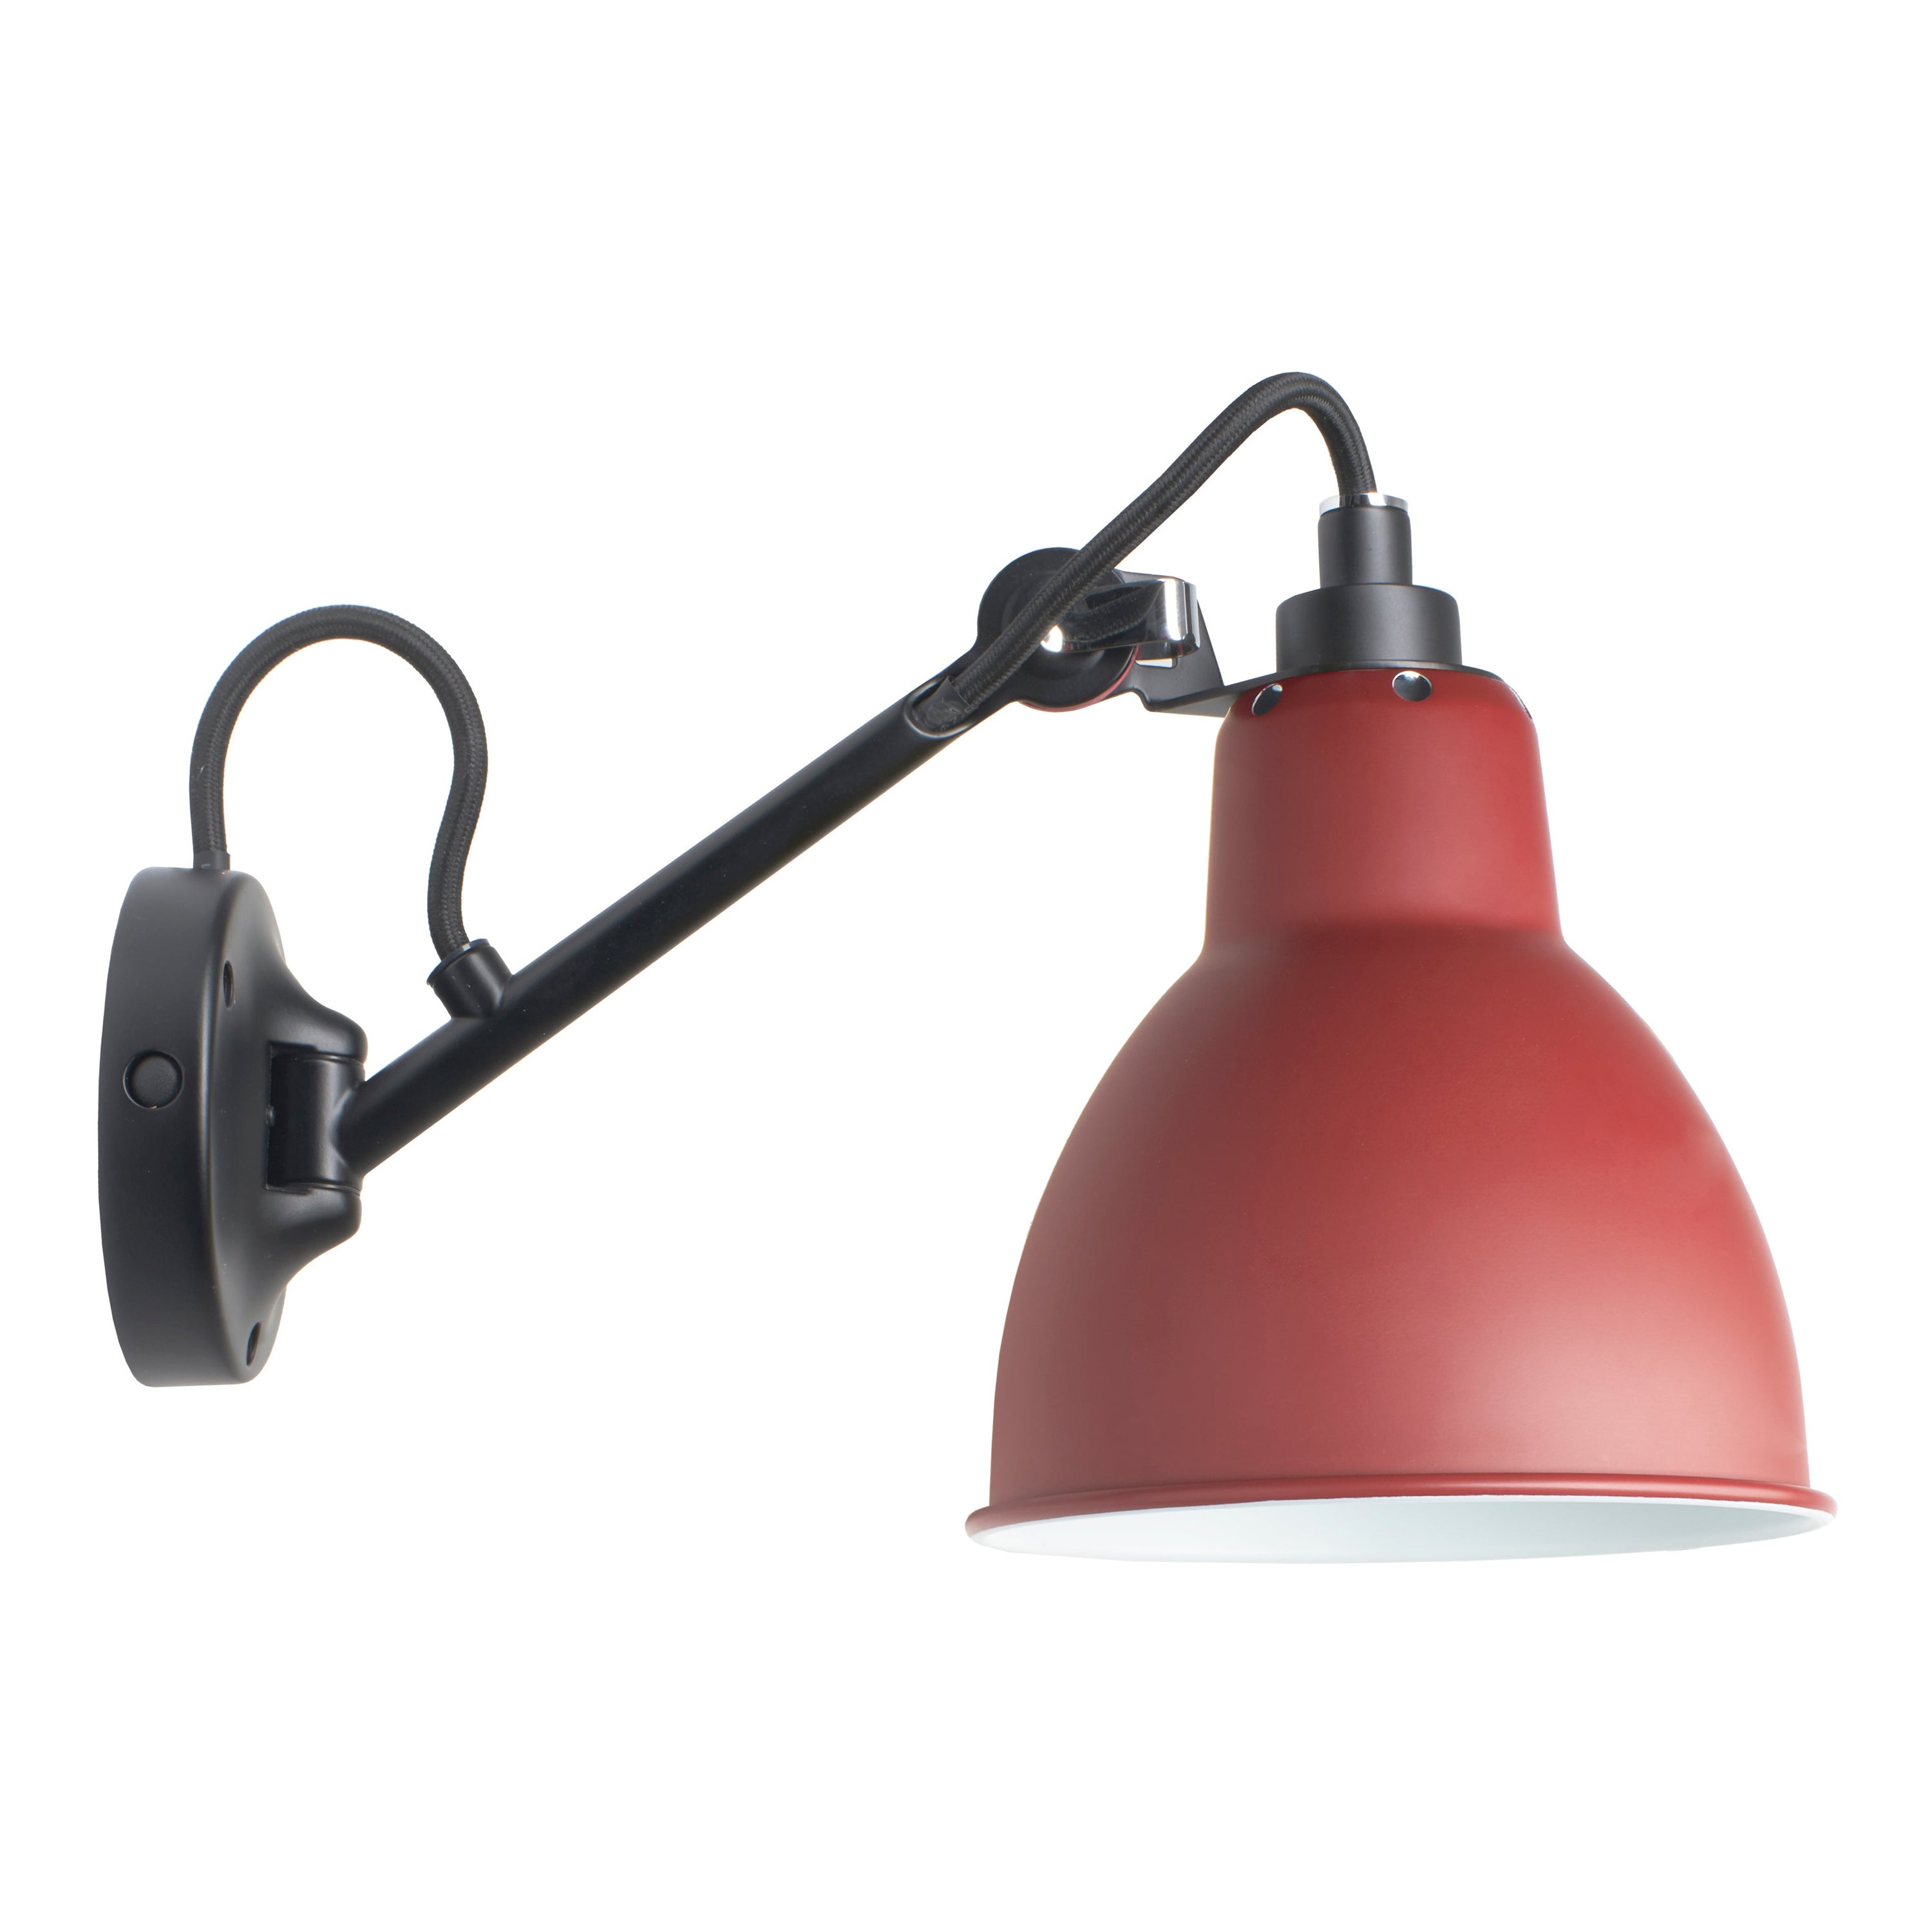 DCW Editions La Lampe Gras N°104 Wall Lamp in Black Arm and Red Shade For Sale